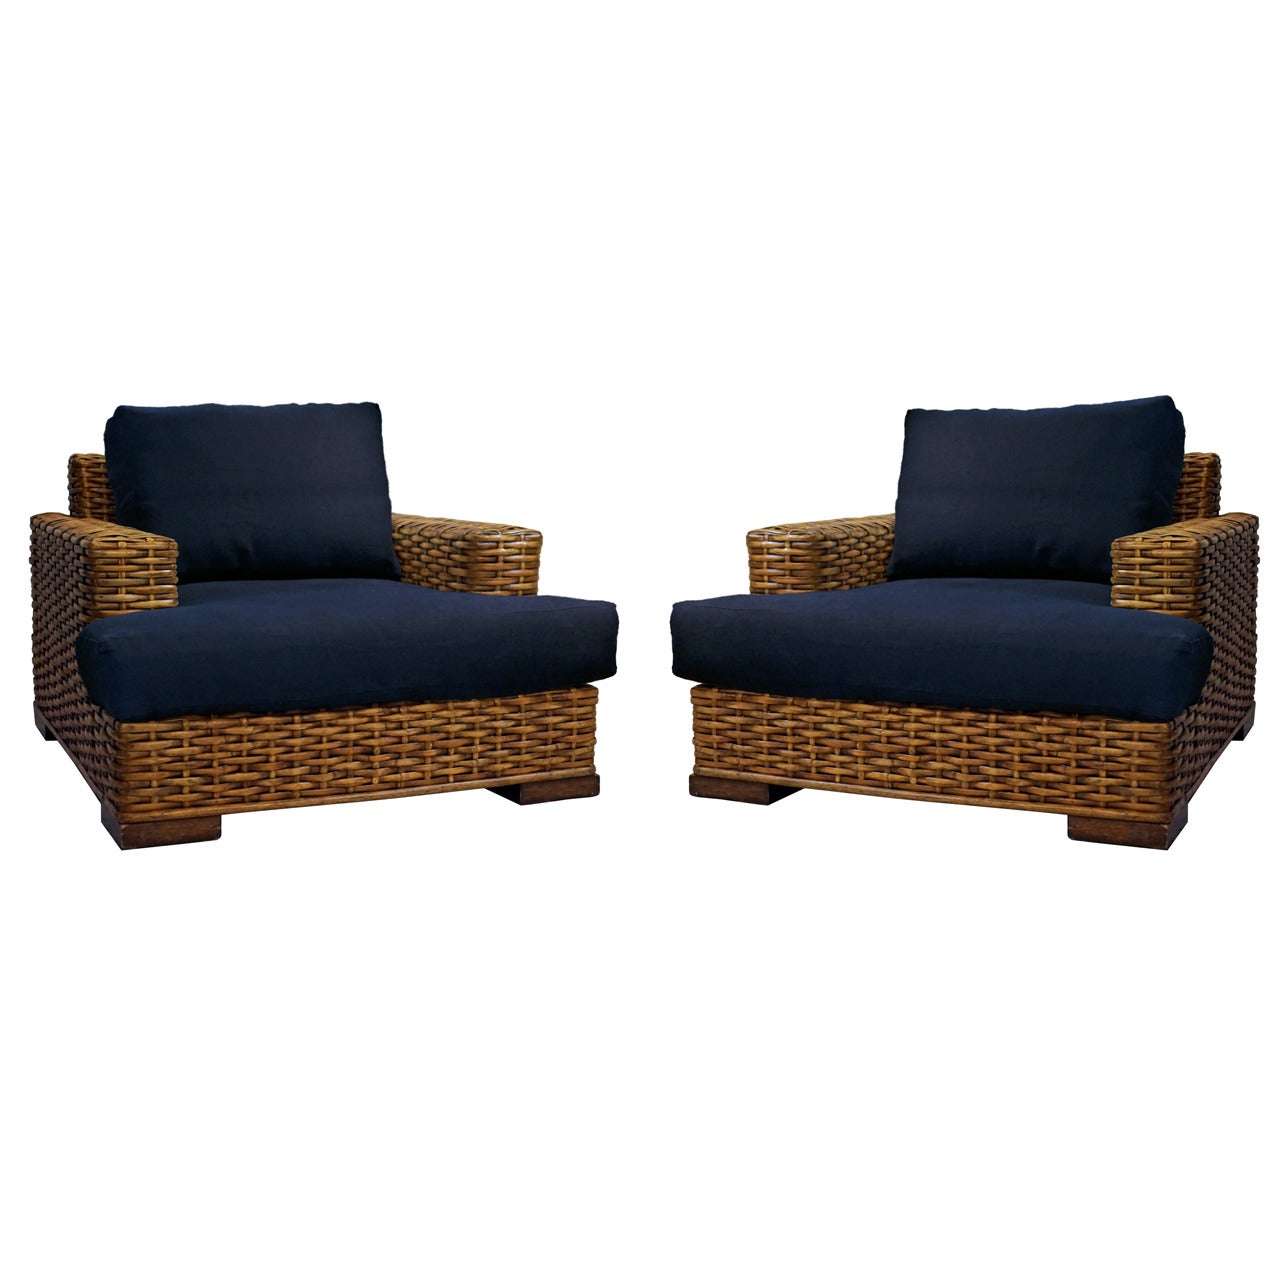 Pair of Ralph Lauren Home Canyon Chairs